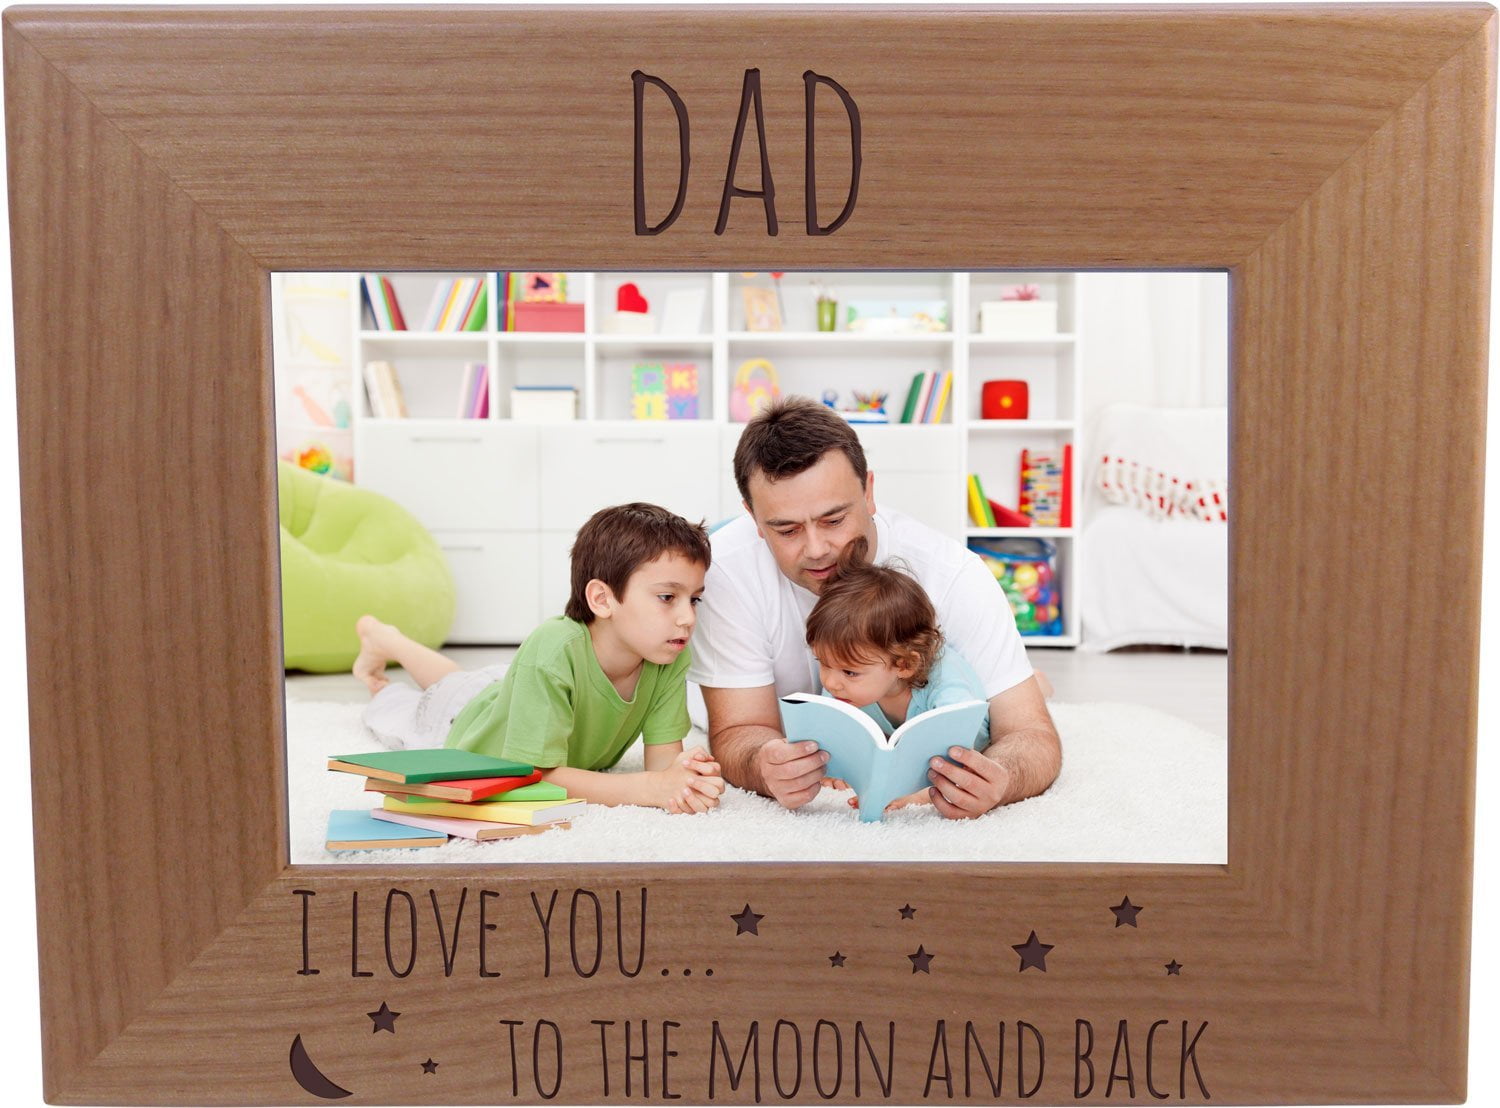 New Grandpa Newborn Details about   Best Dads Promoted to Gramps Engraved Wood Picture Frame 